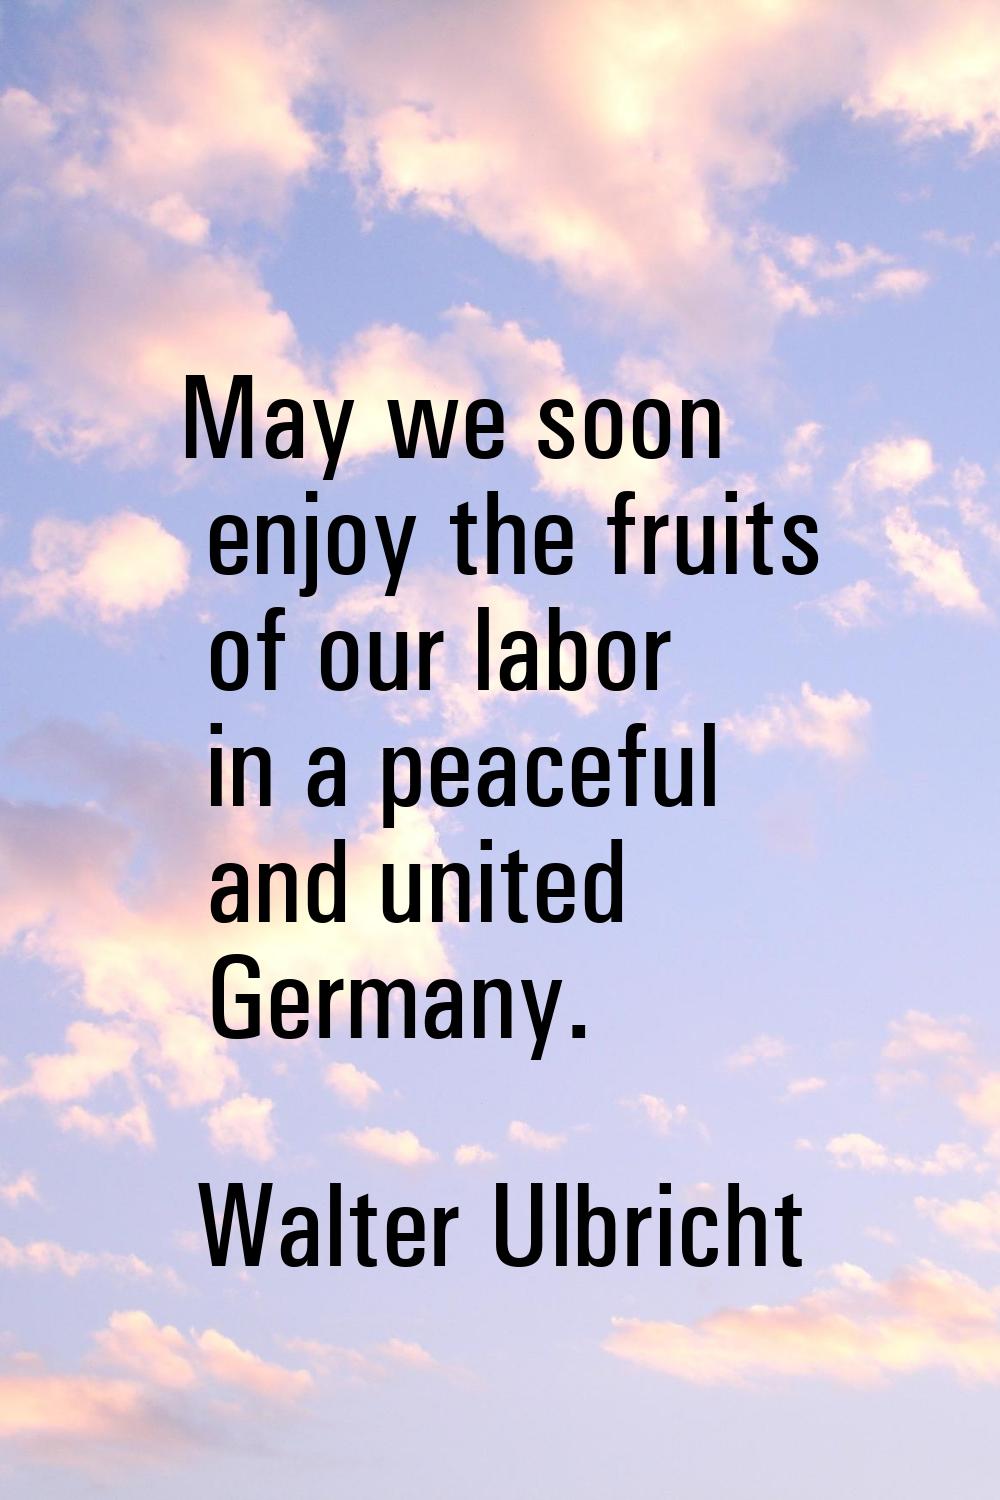 May we soon enjoy the fruits of our labor in a peaceful and united Germany.